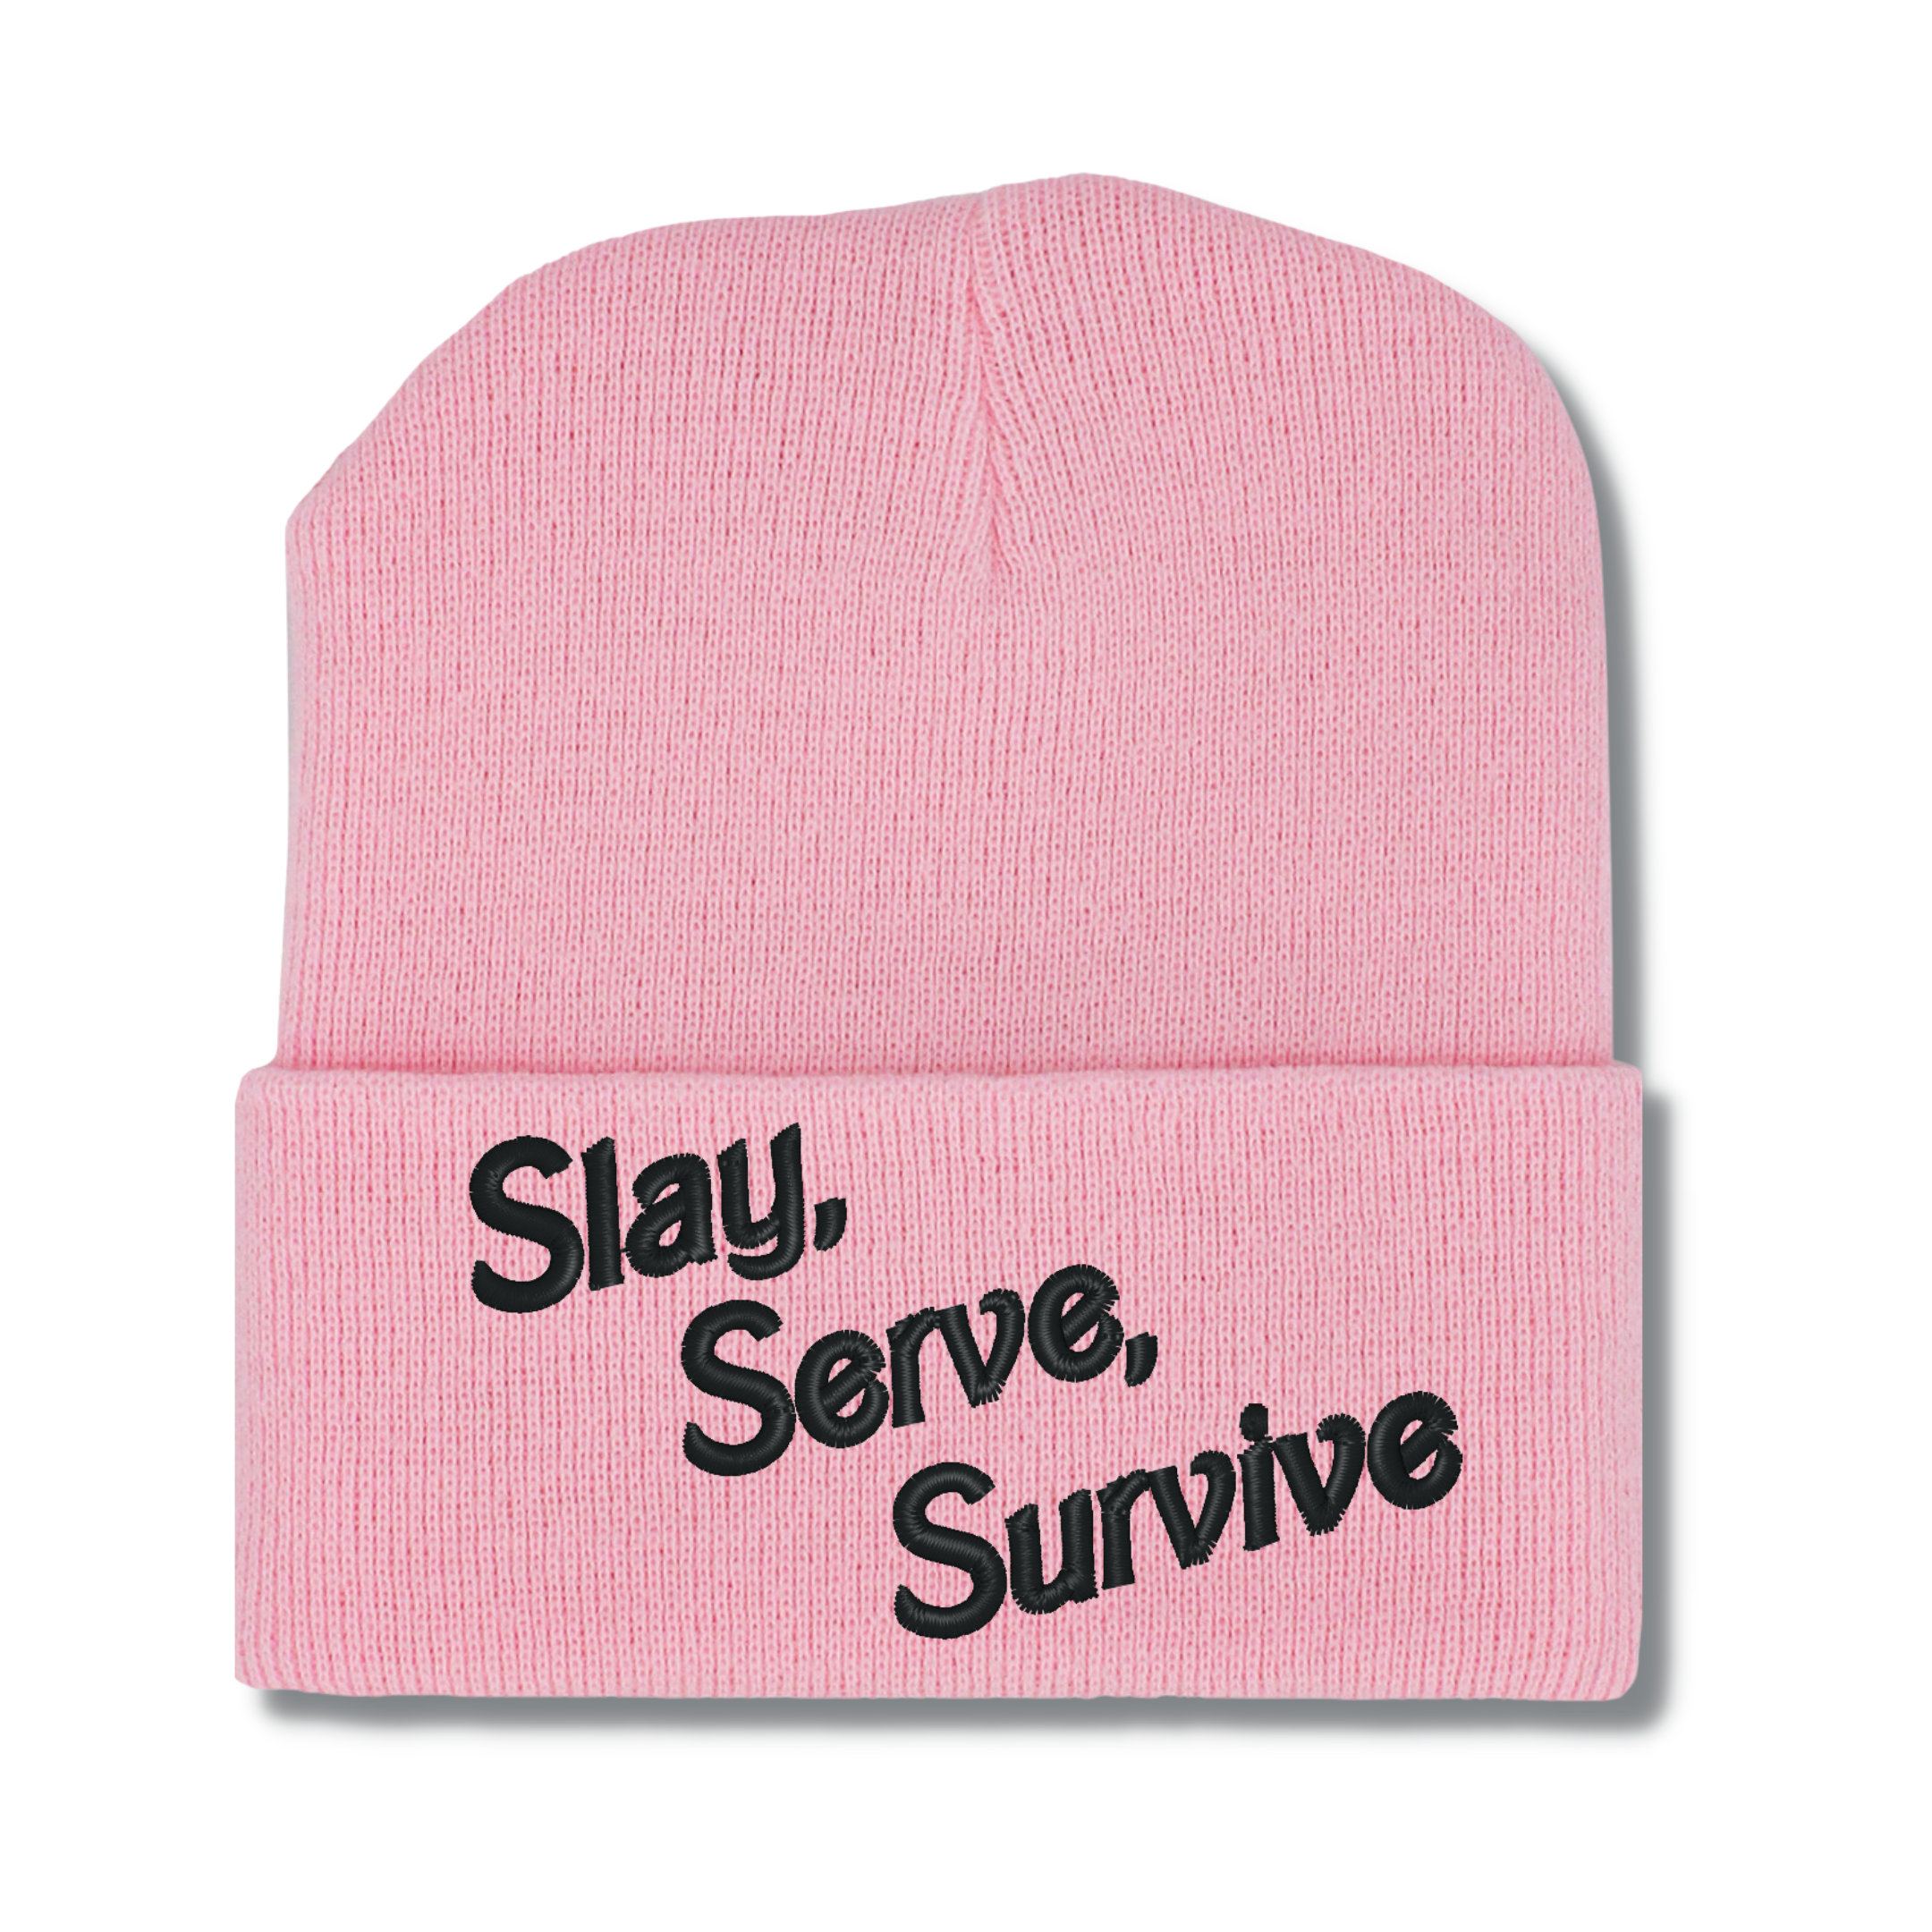 Slay Serve Survive Embroidered Beanie Hat, One Size Fits All